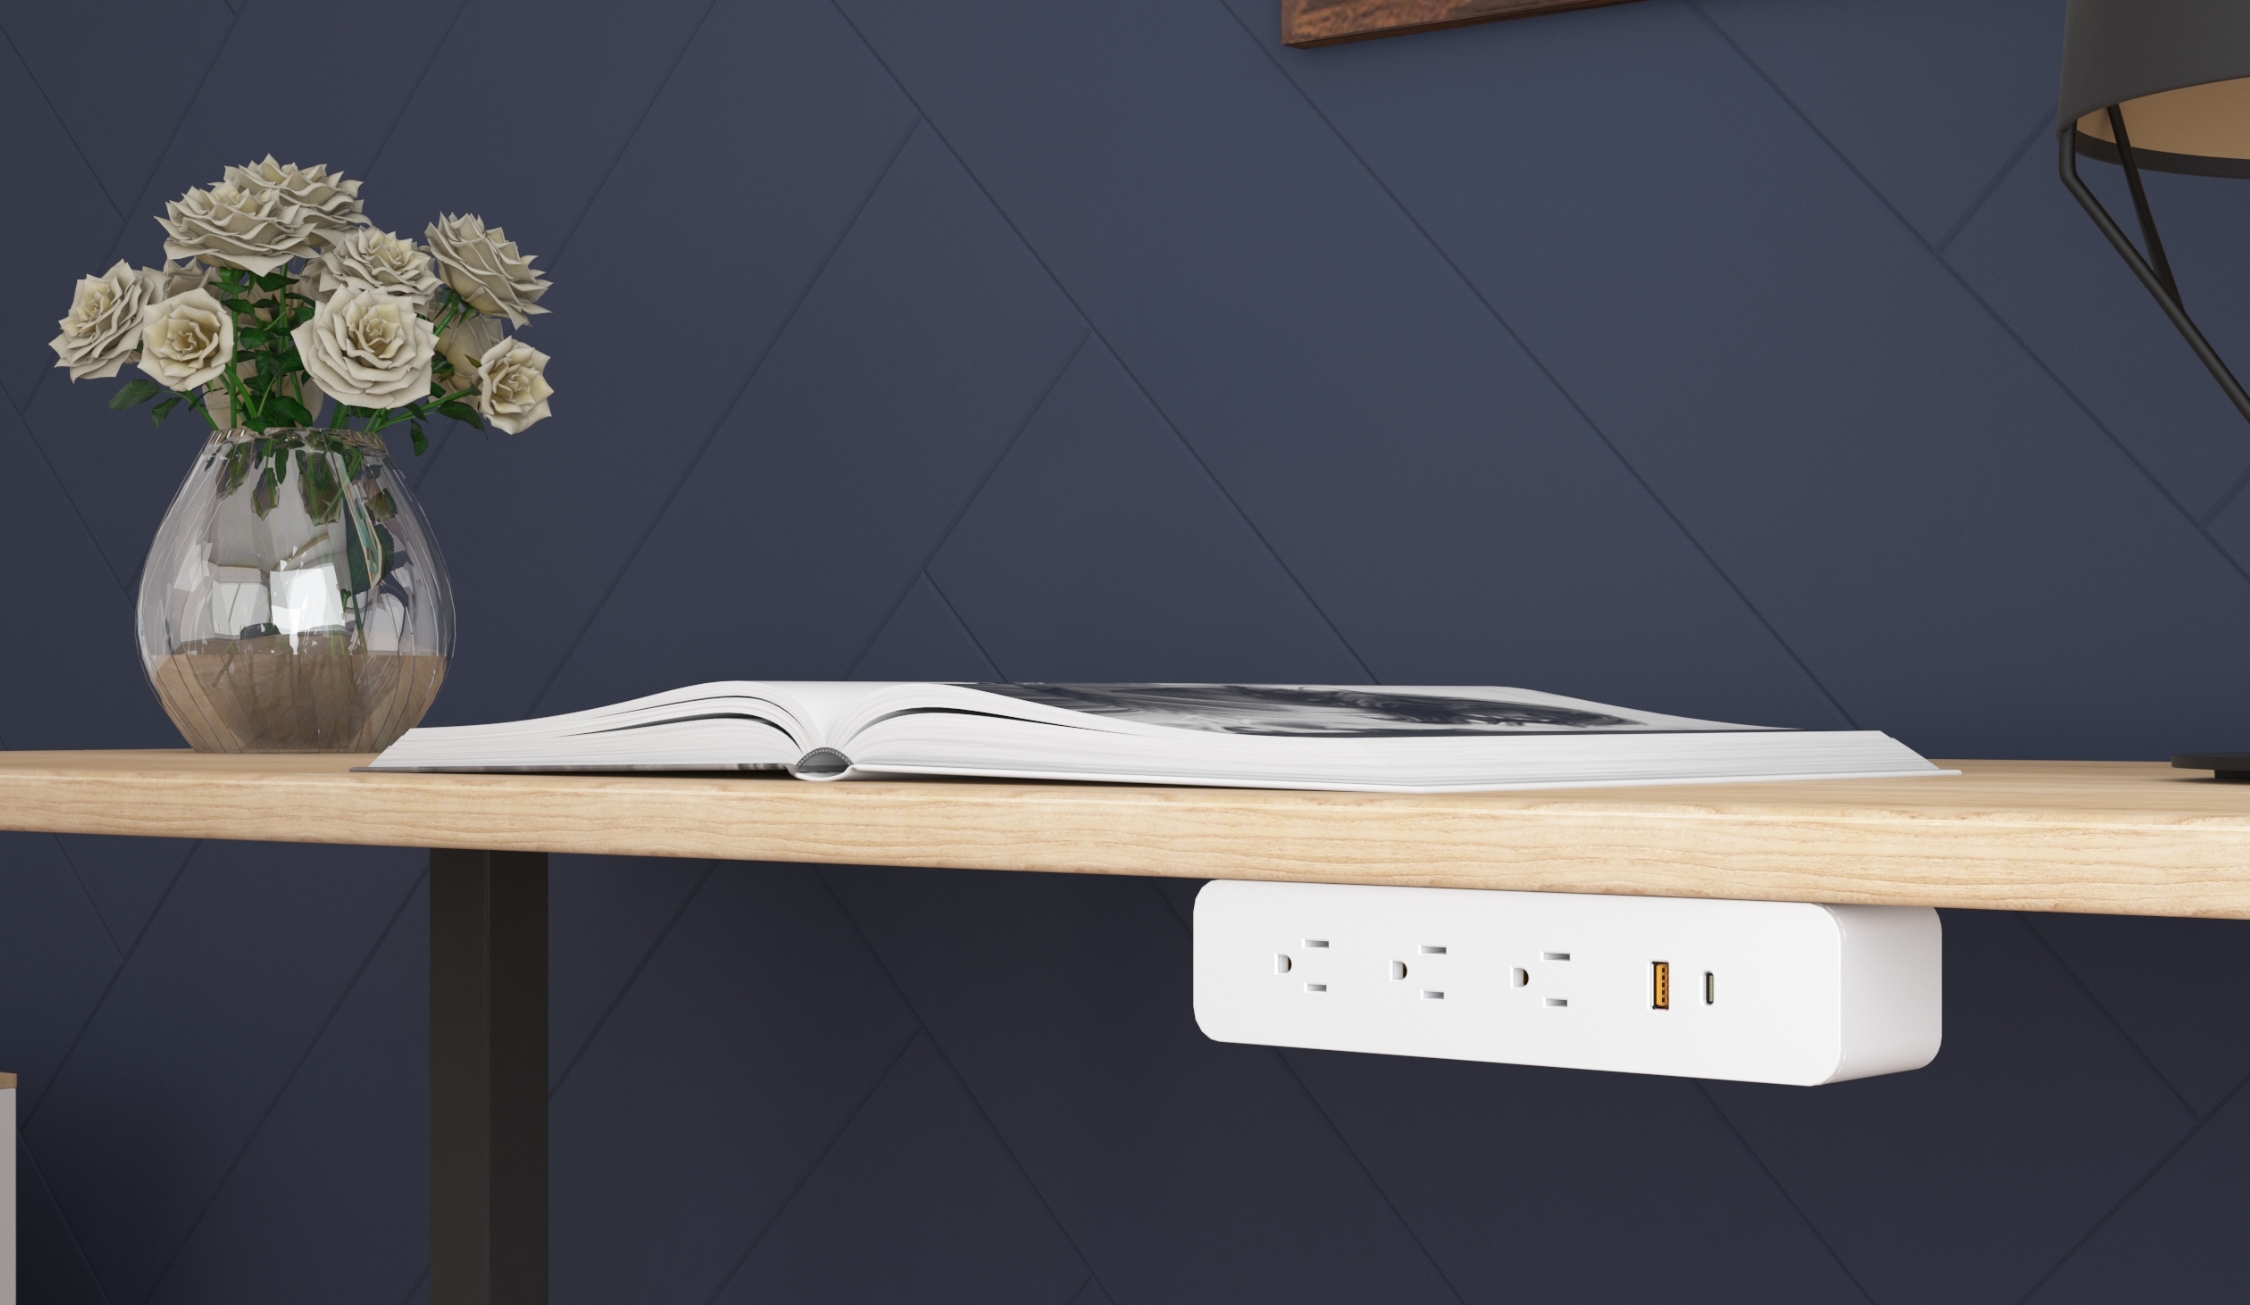 How Do Under Desk Power Sockets Contribute To An Ergonomic Workspace?